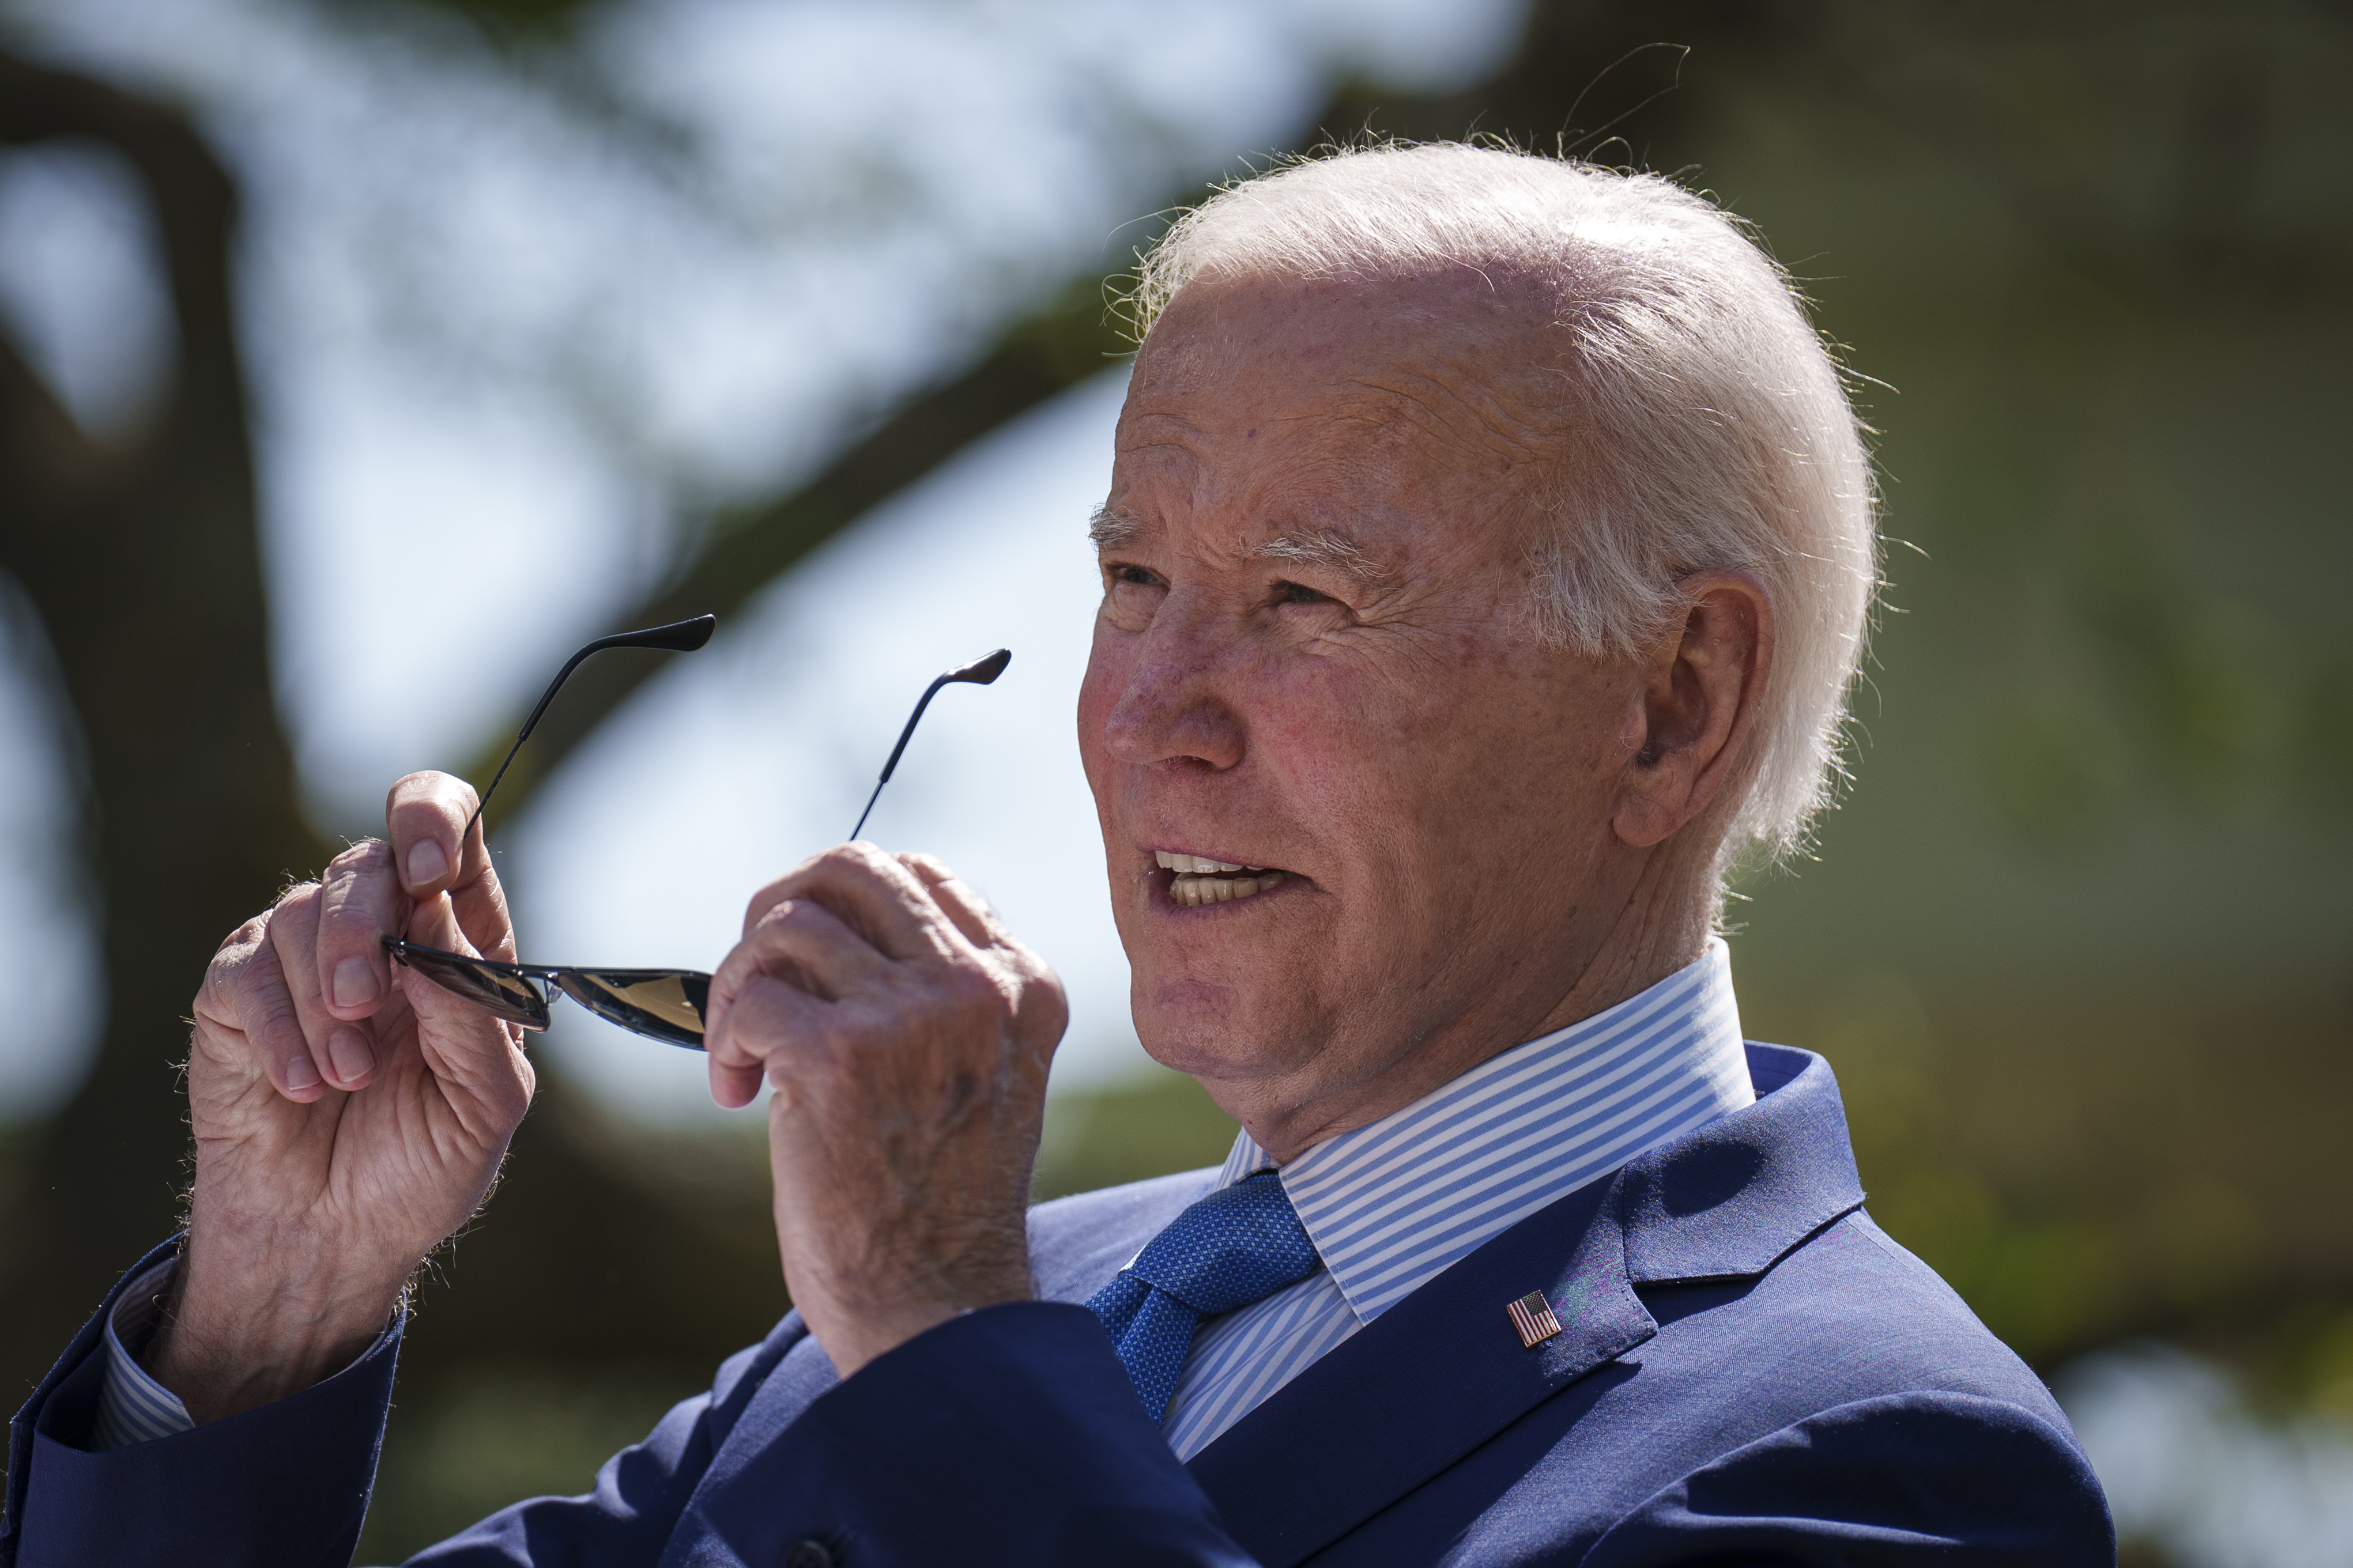 Joe Biden Takes Aim At “MAGA Extremists” In Re-Election Announcement